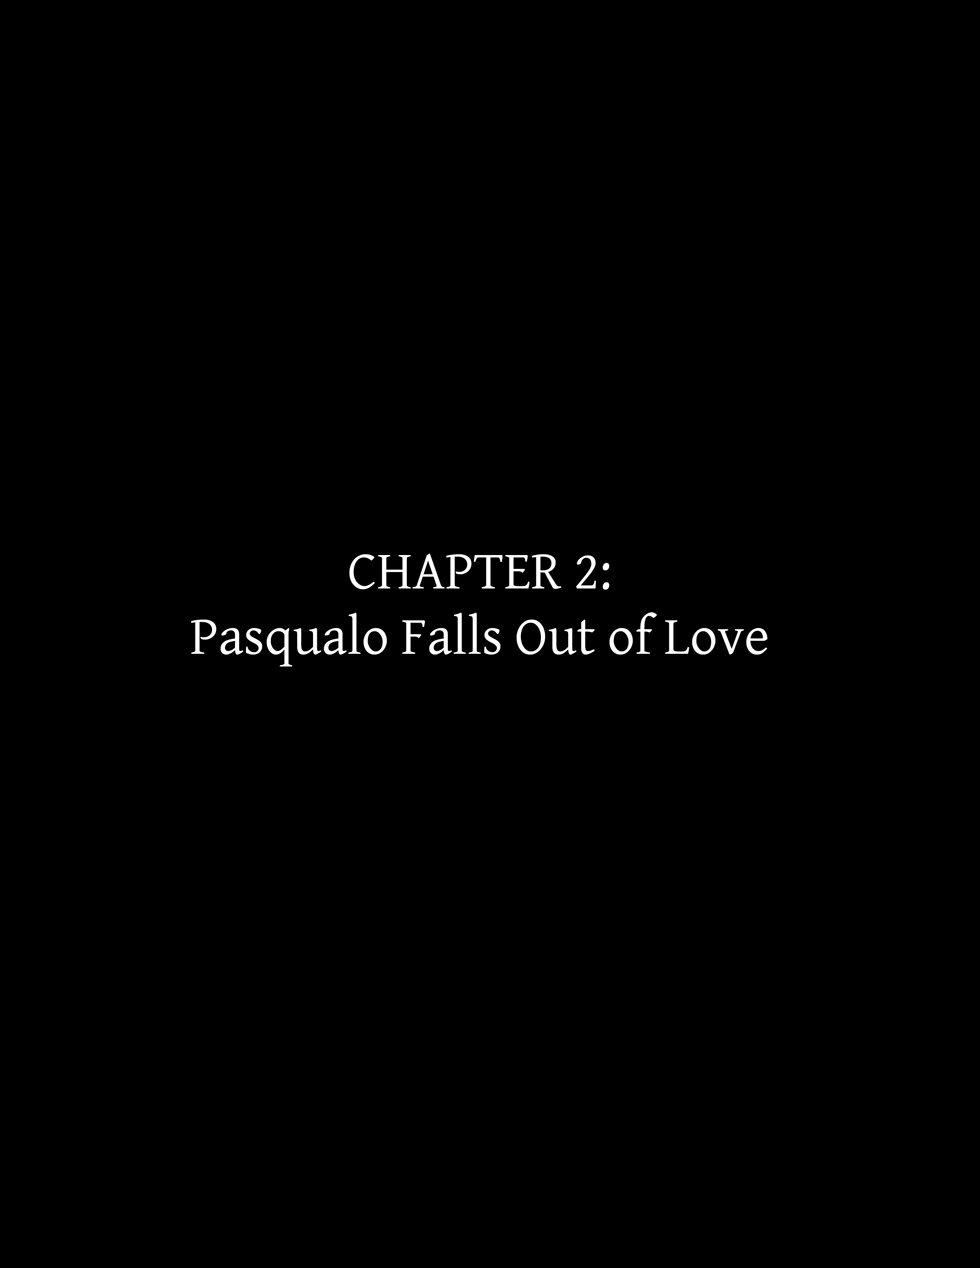 Chapter 2: Pasqualo Falls Out of Love